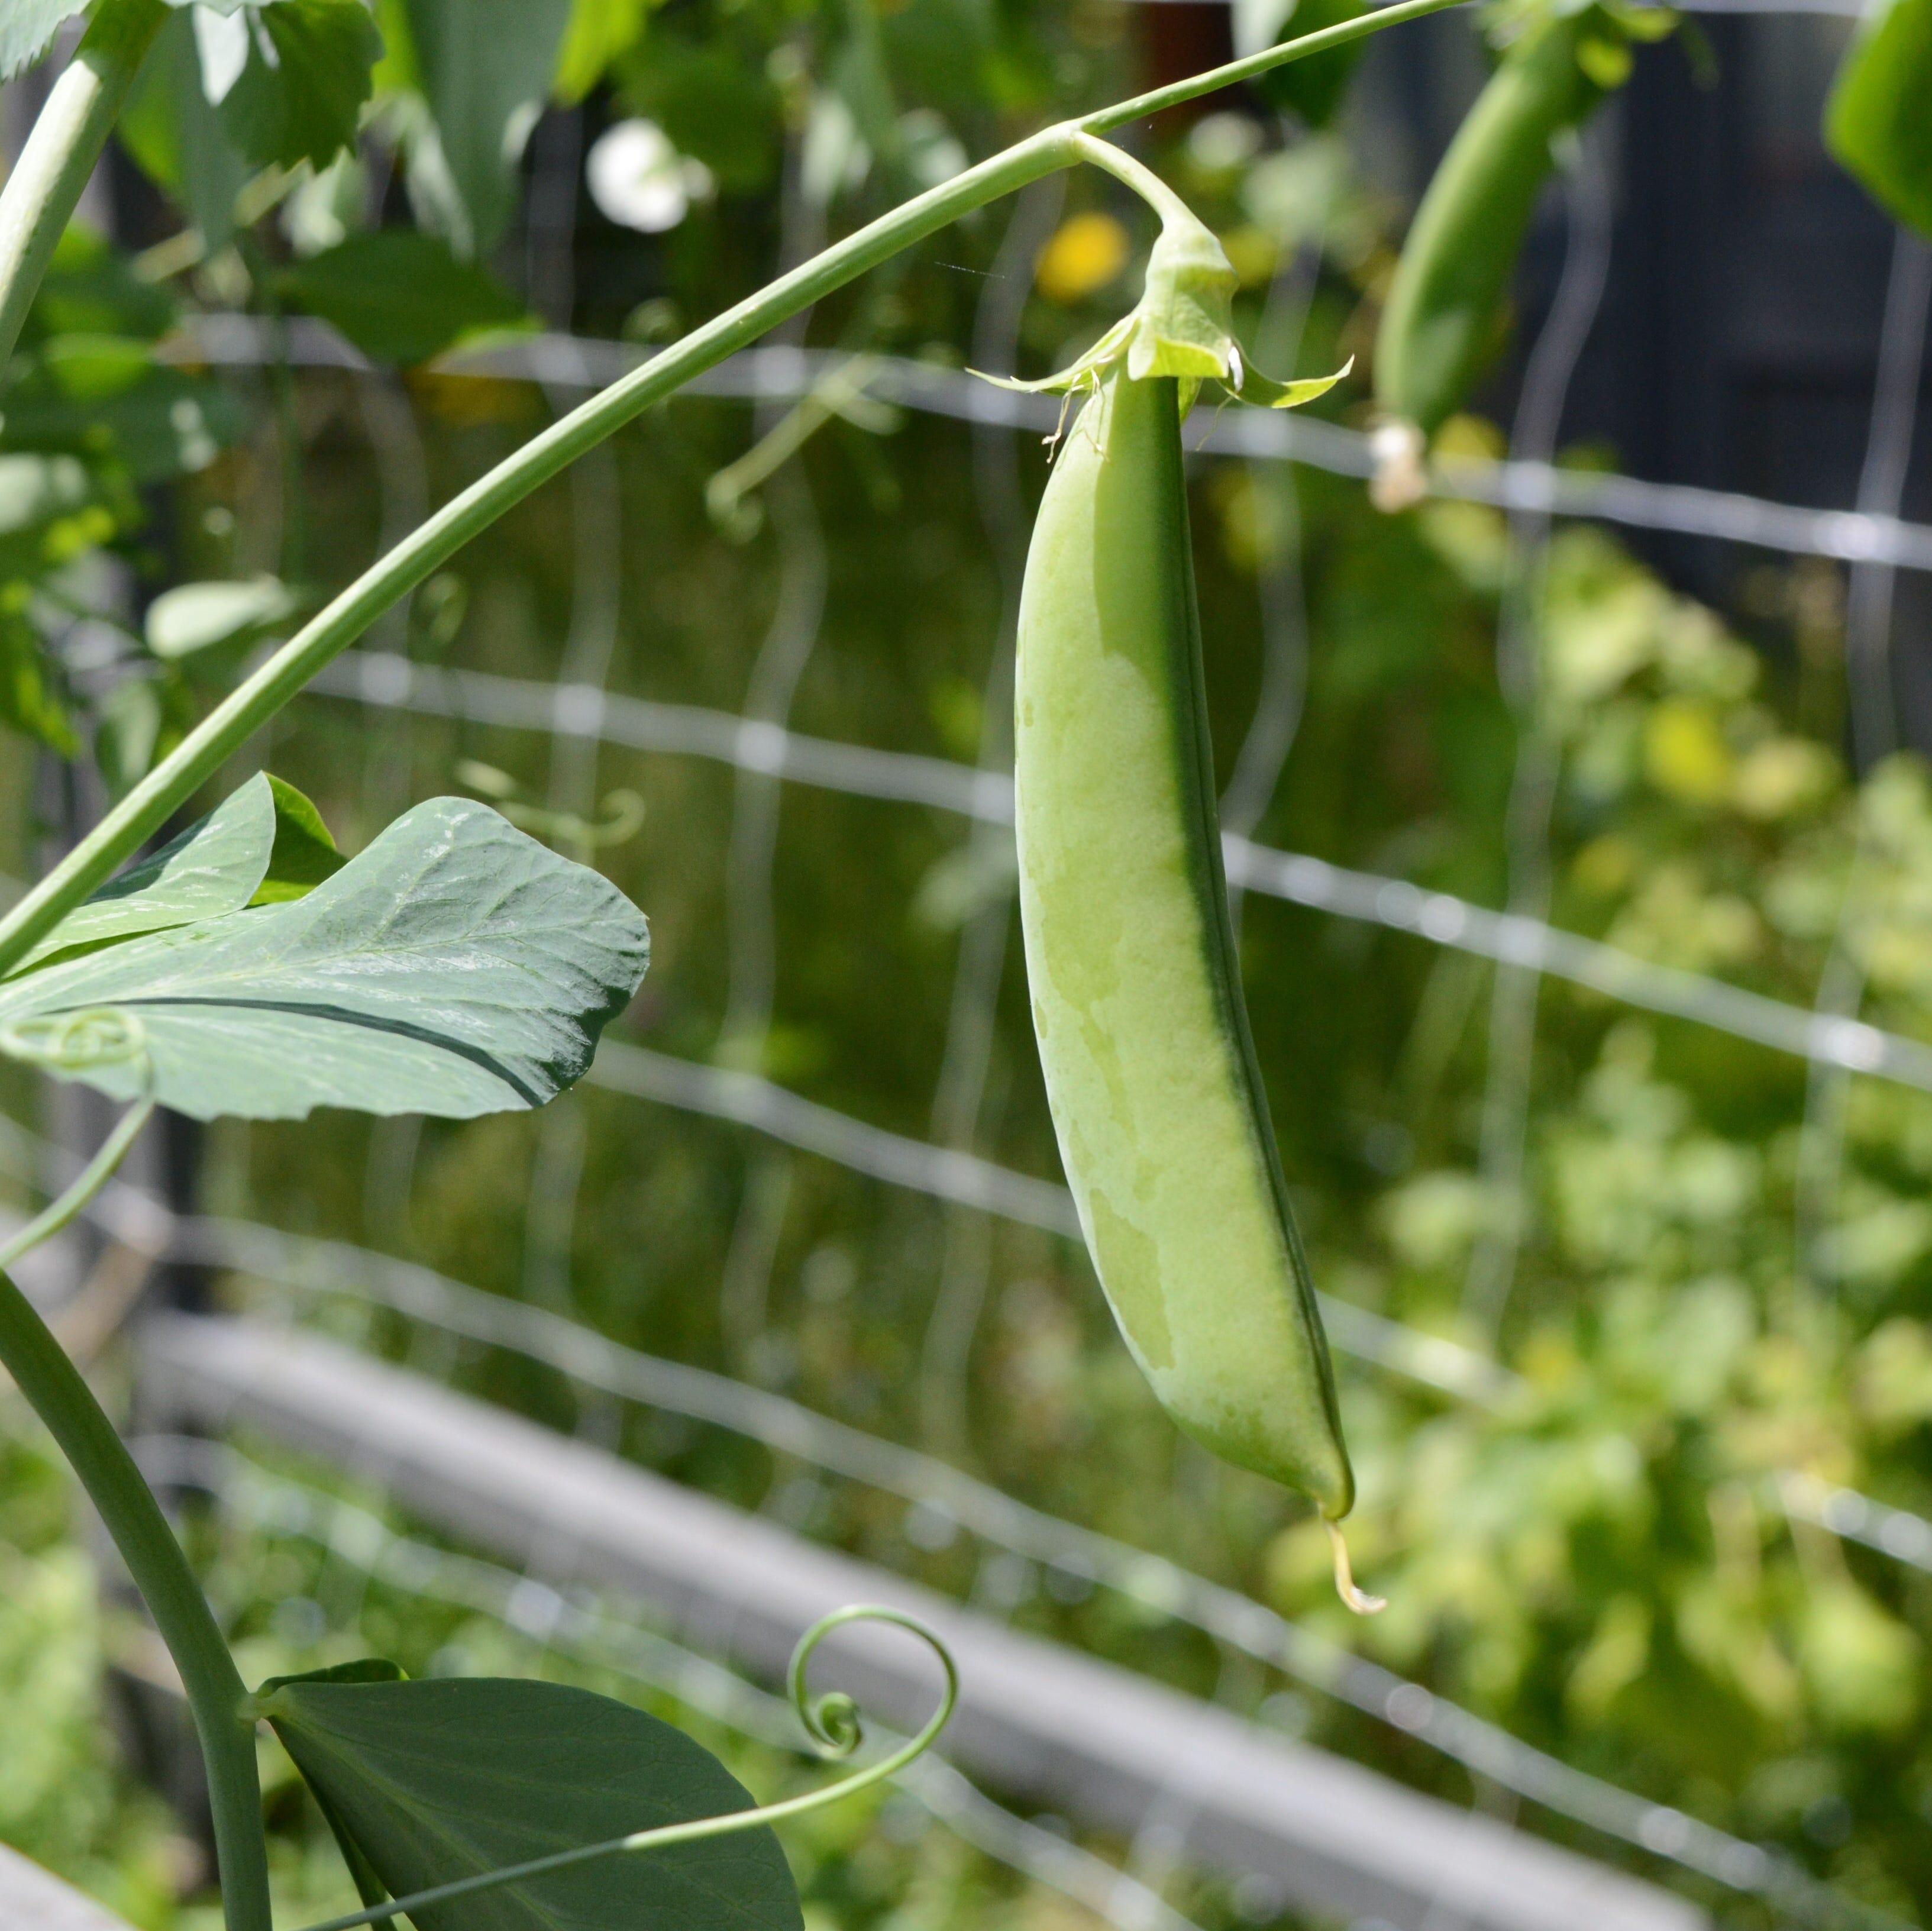 Snap peas can be planted as early as the last week in March in western New York.